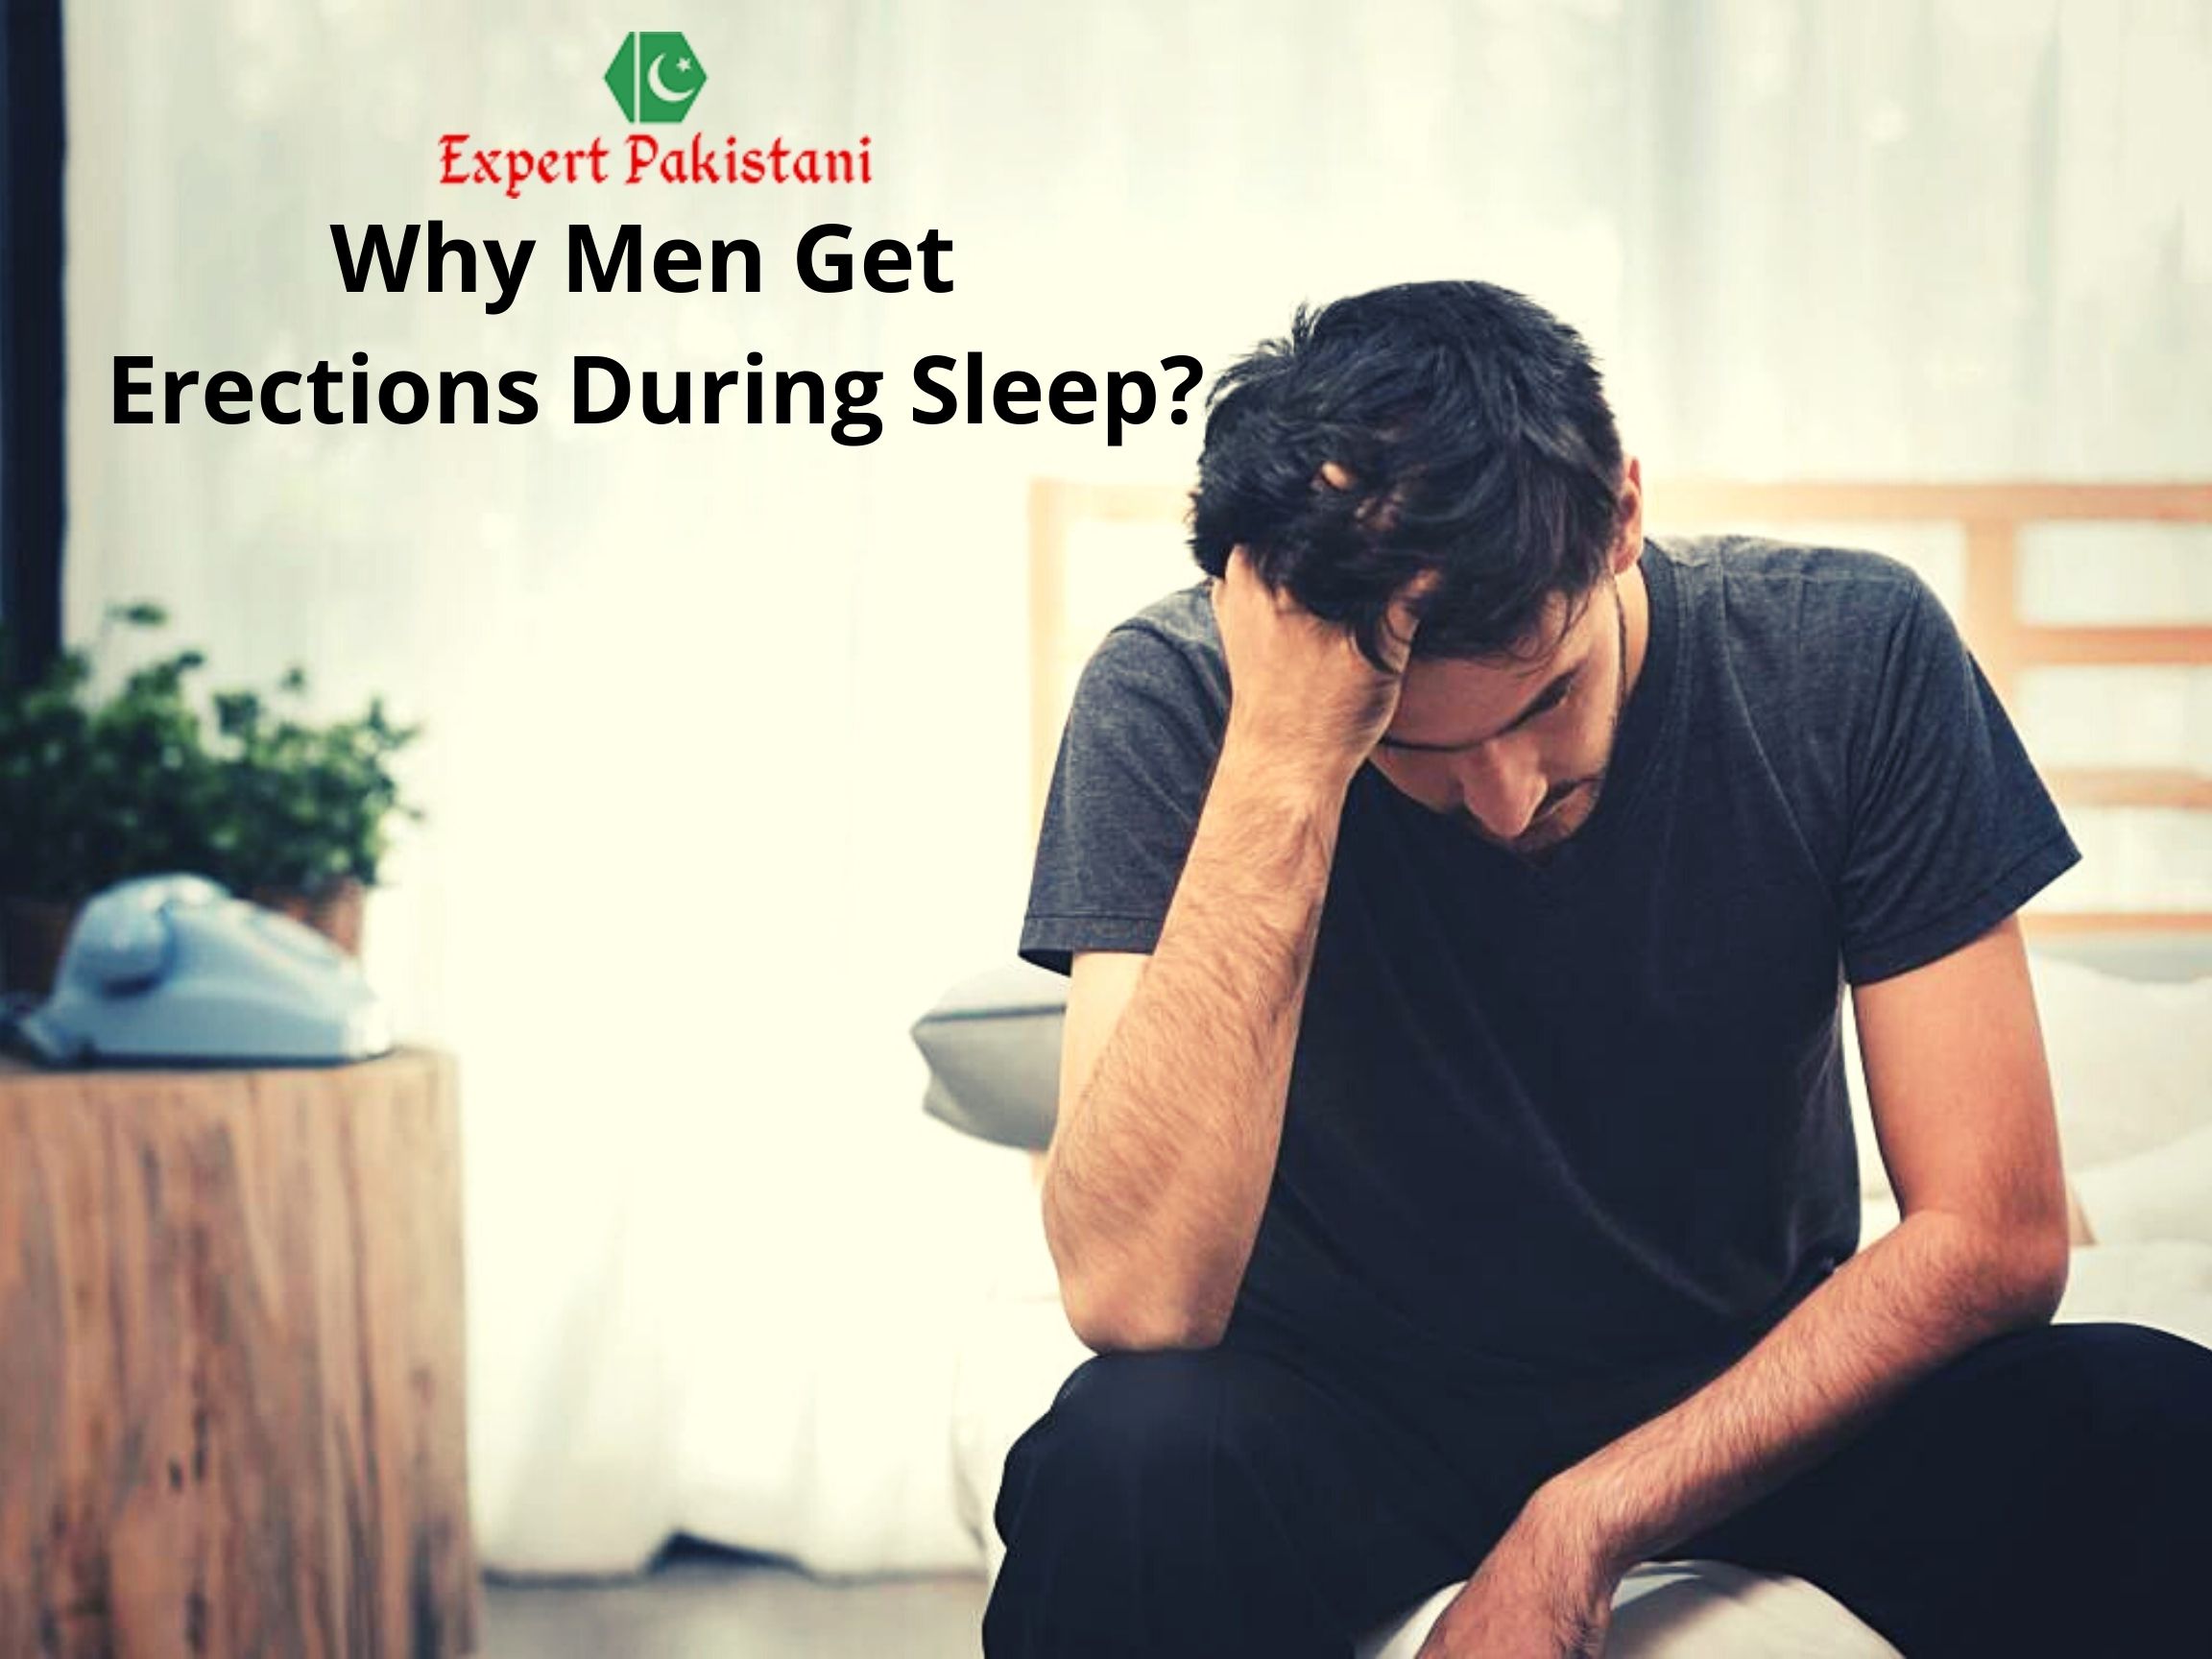 Why Men Get Erections During Sleep